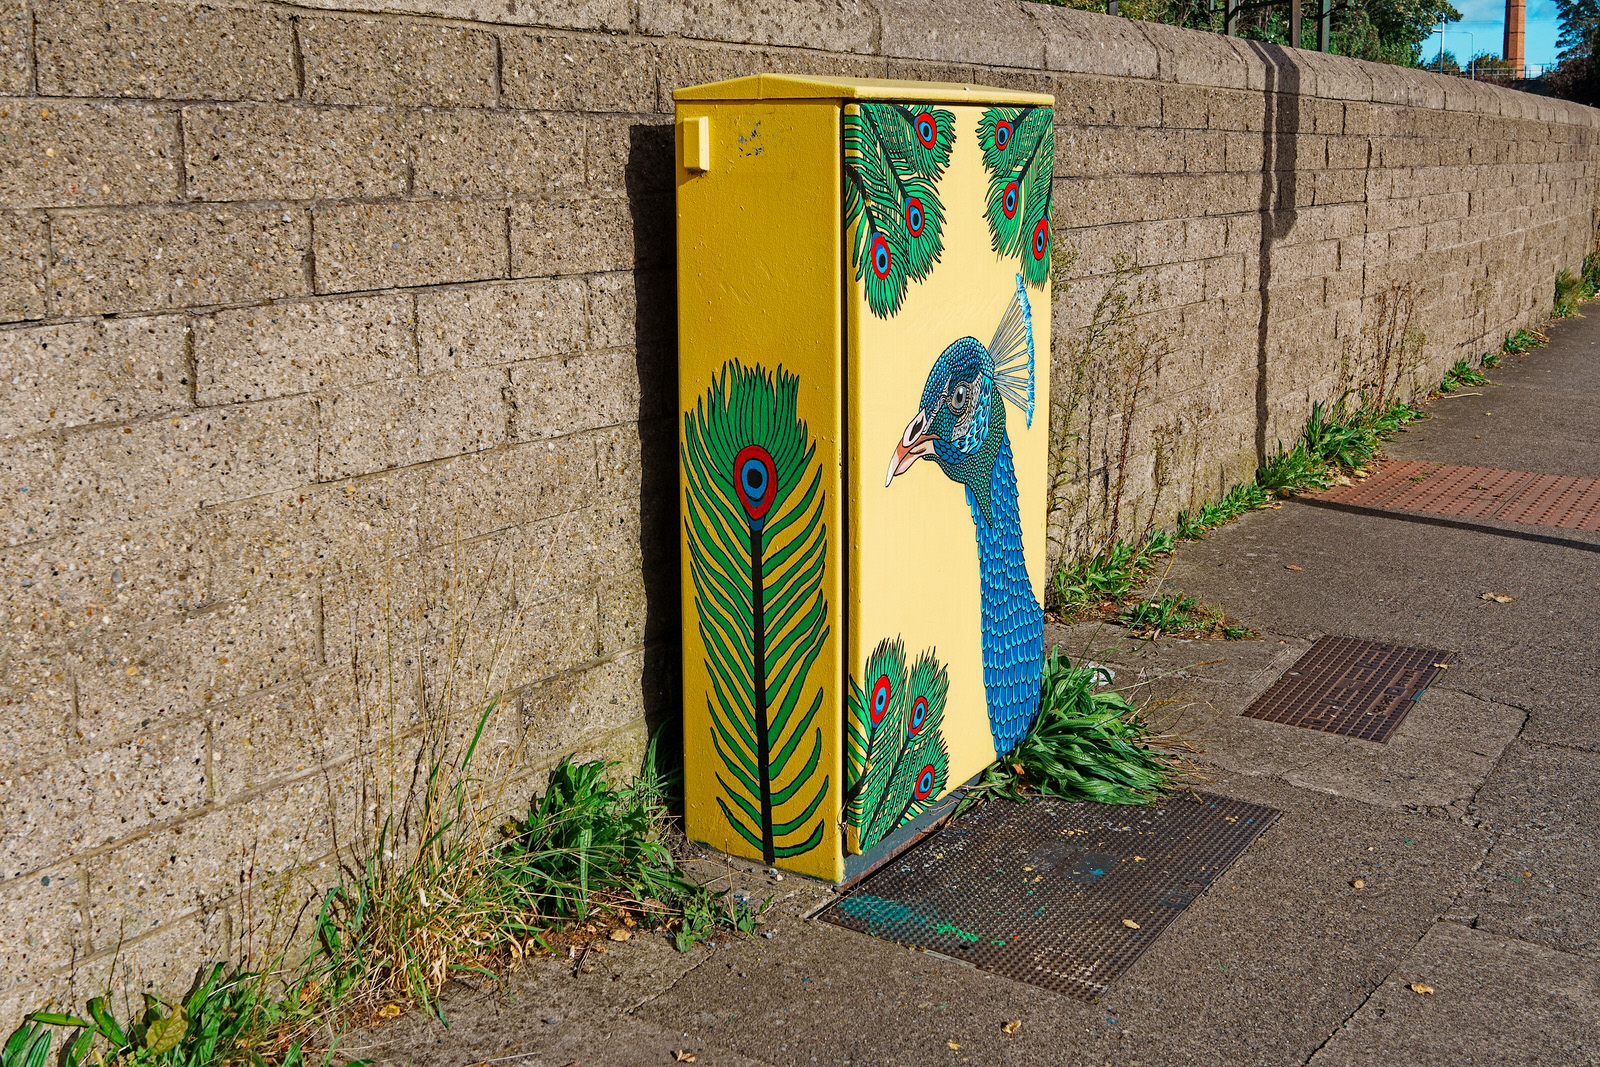 PEACOCK BY CONOR FITZPATRICK @FIZZDESIGNS [PAINT-A-BOX STREET ART IN MILLTOWN] 002